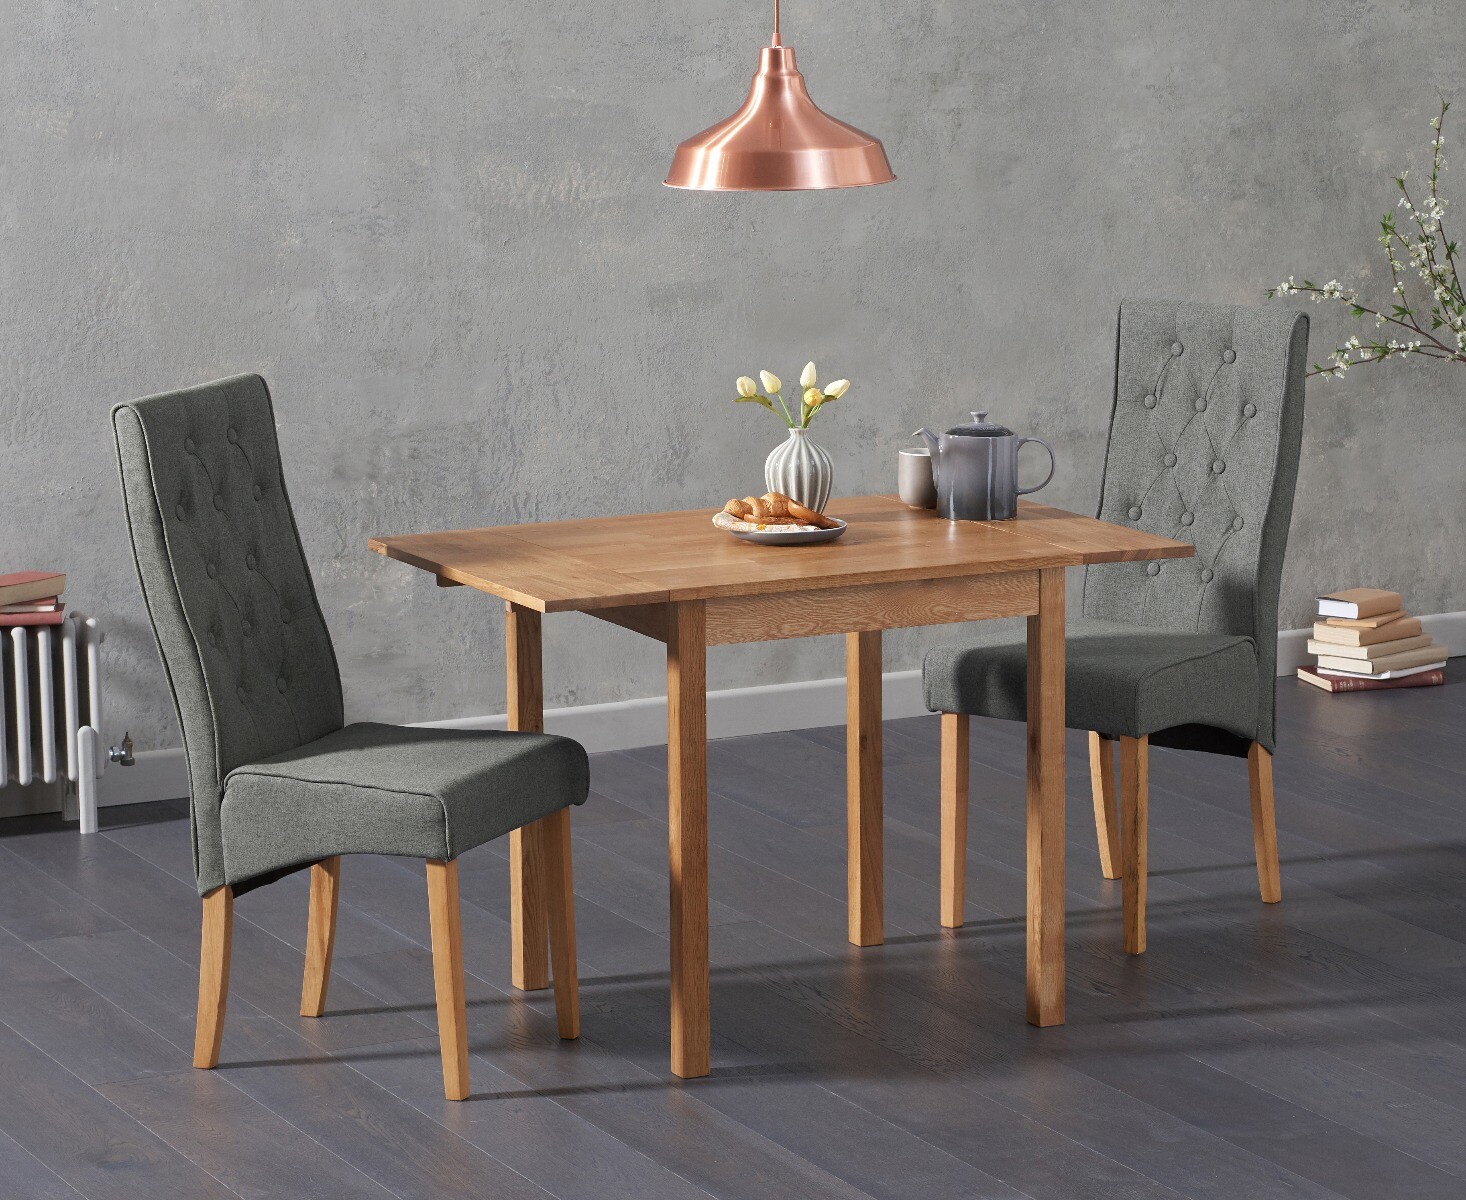 Extending York 70cm Solid Oak Dining Table With 2 Grey Maya Chairs